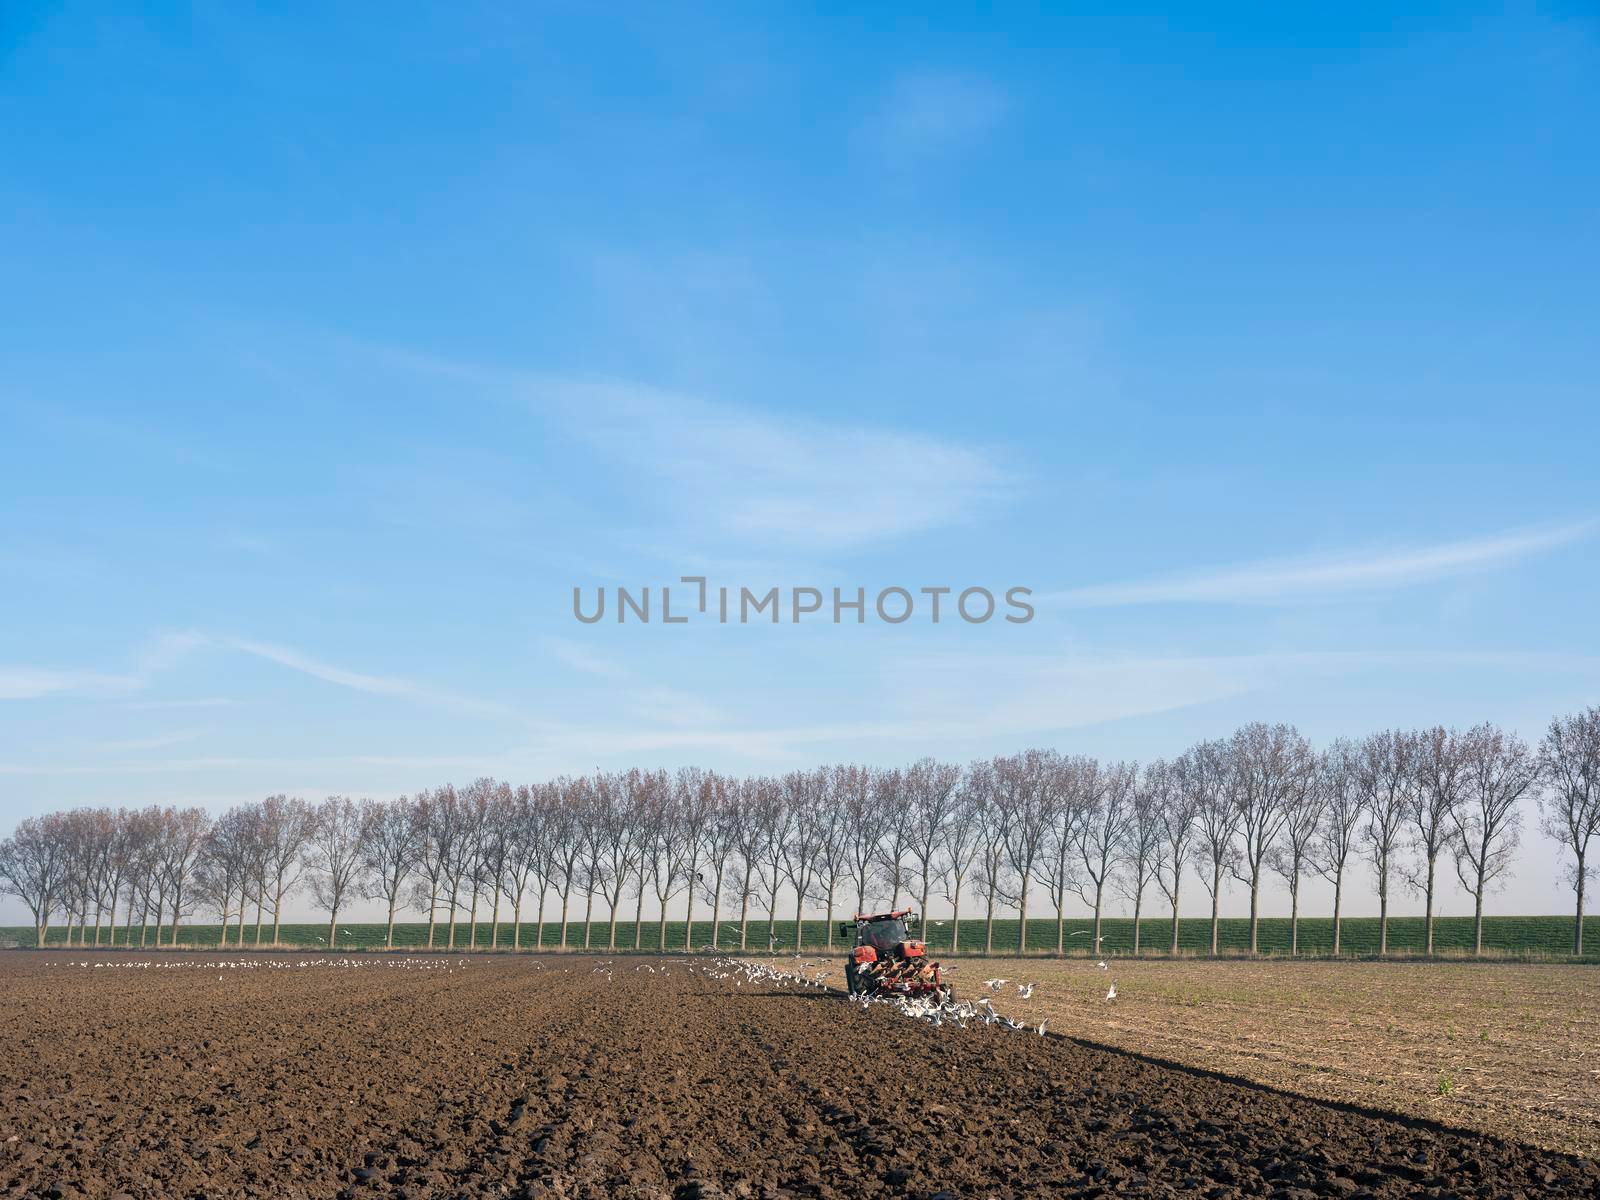 tractor with plough on field early spring in the netherlands on the island of goeree en overflakkee under blue sky